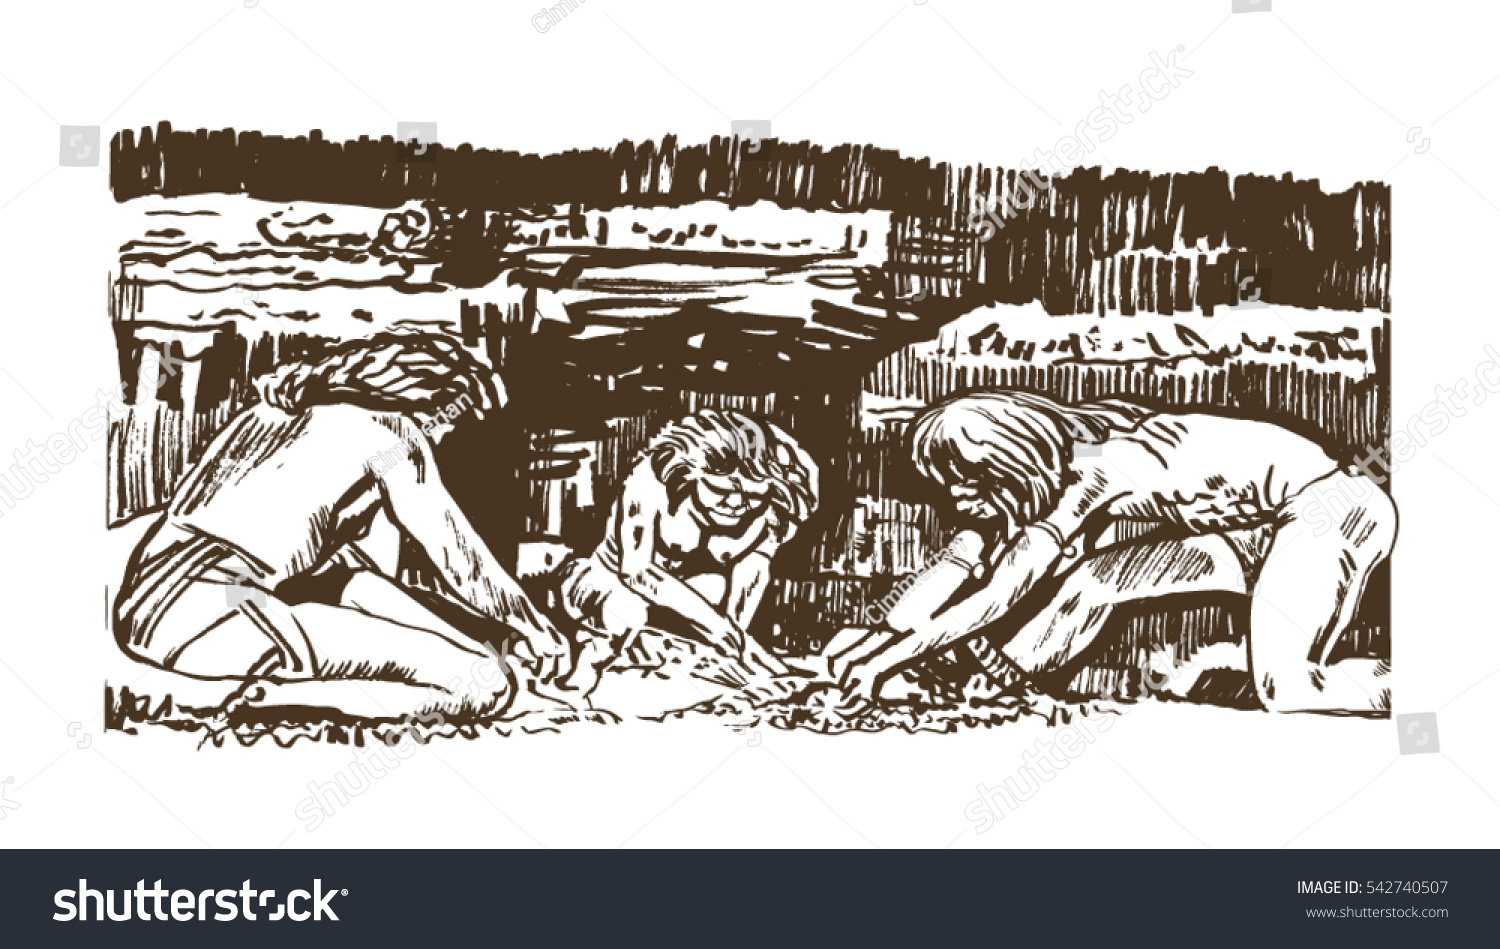 SVG of Cro-Magnon (Homo sapiens) man in a cave mined fire. Hand drawn illustration. svg